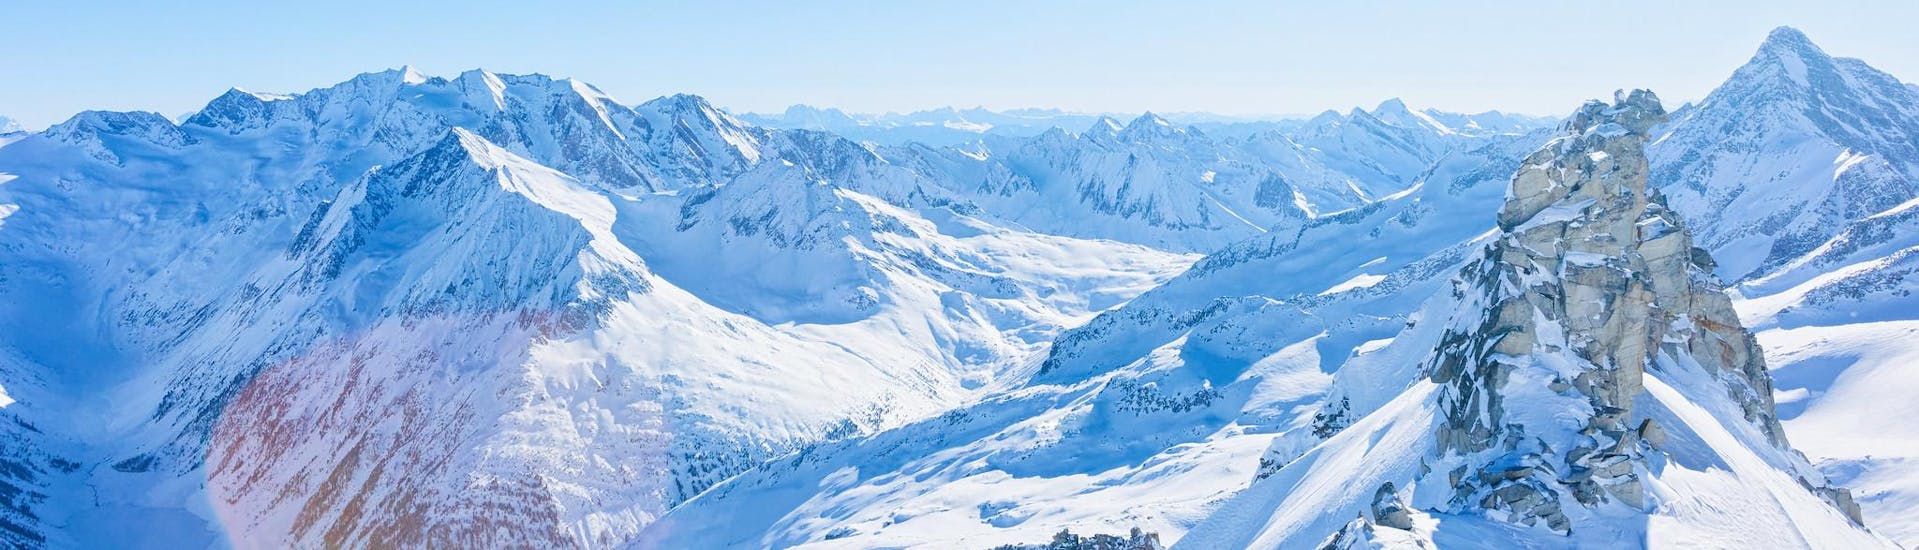 View of the snow-covered peaks of Hintertux Glacier, where local ski schools offer their ski lessons.